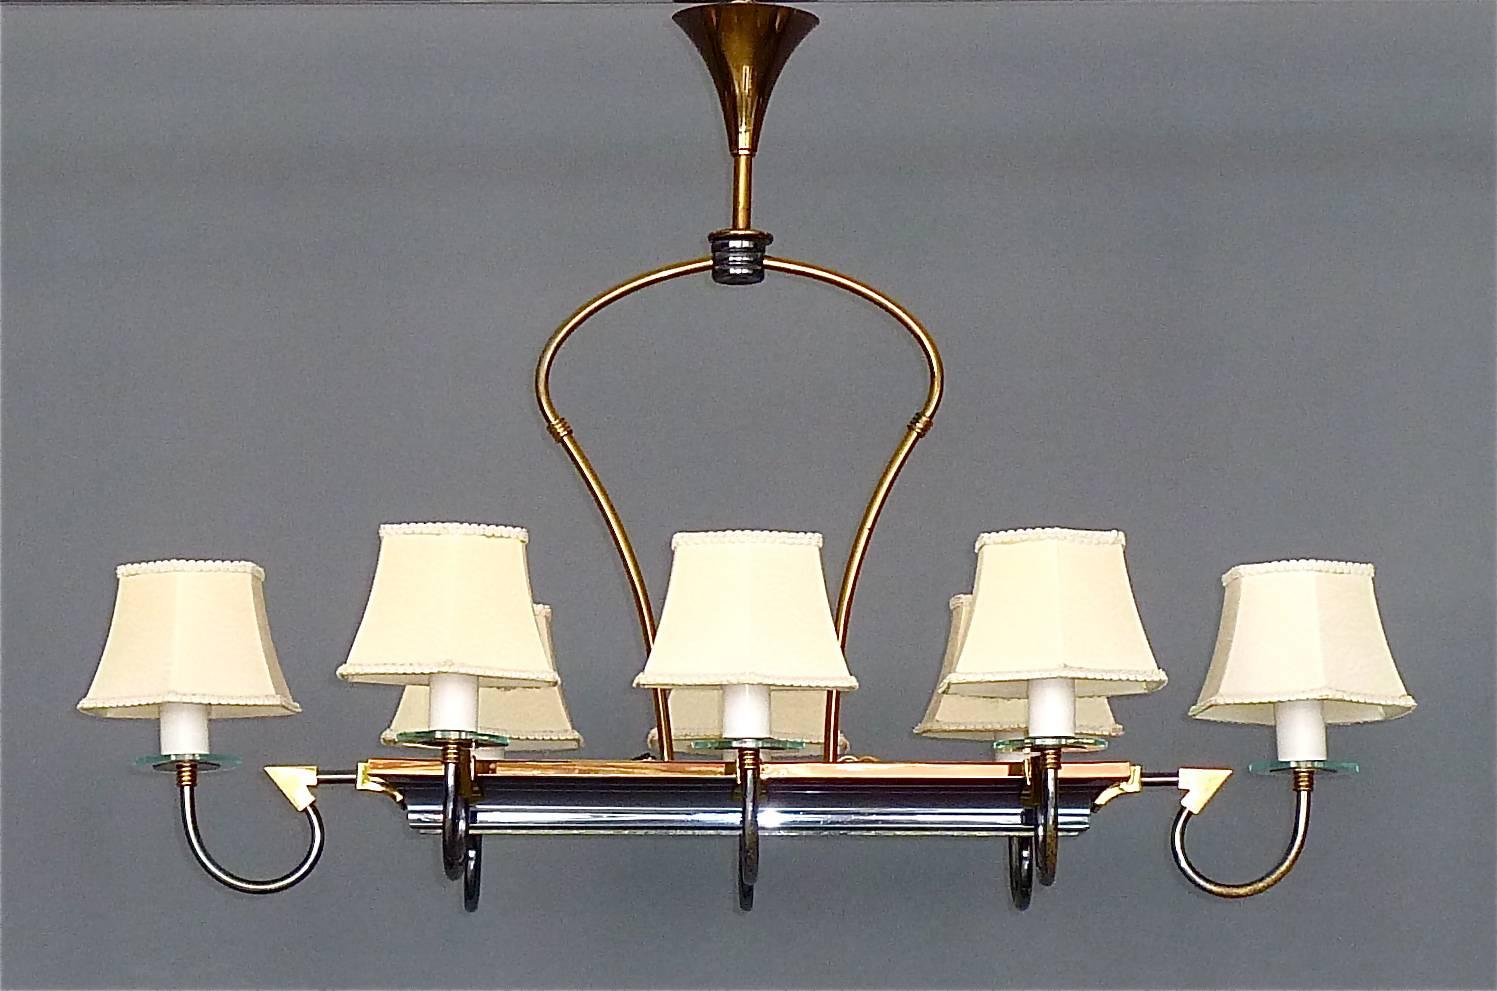 Fantastic large and fine Maison Arlus midcentury chandelier, France, circa 1940-1950. Eight-arm chandelier in gilt brass metal with blueish-grey enameled accents, glass discs finals and original nylon shades, center light in boat shape with textured